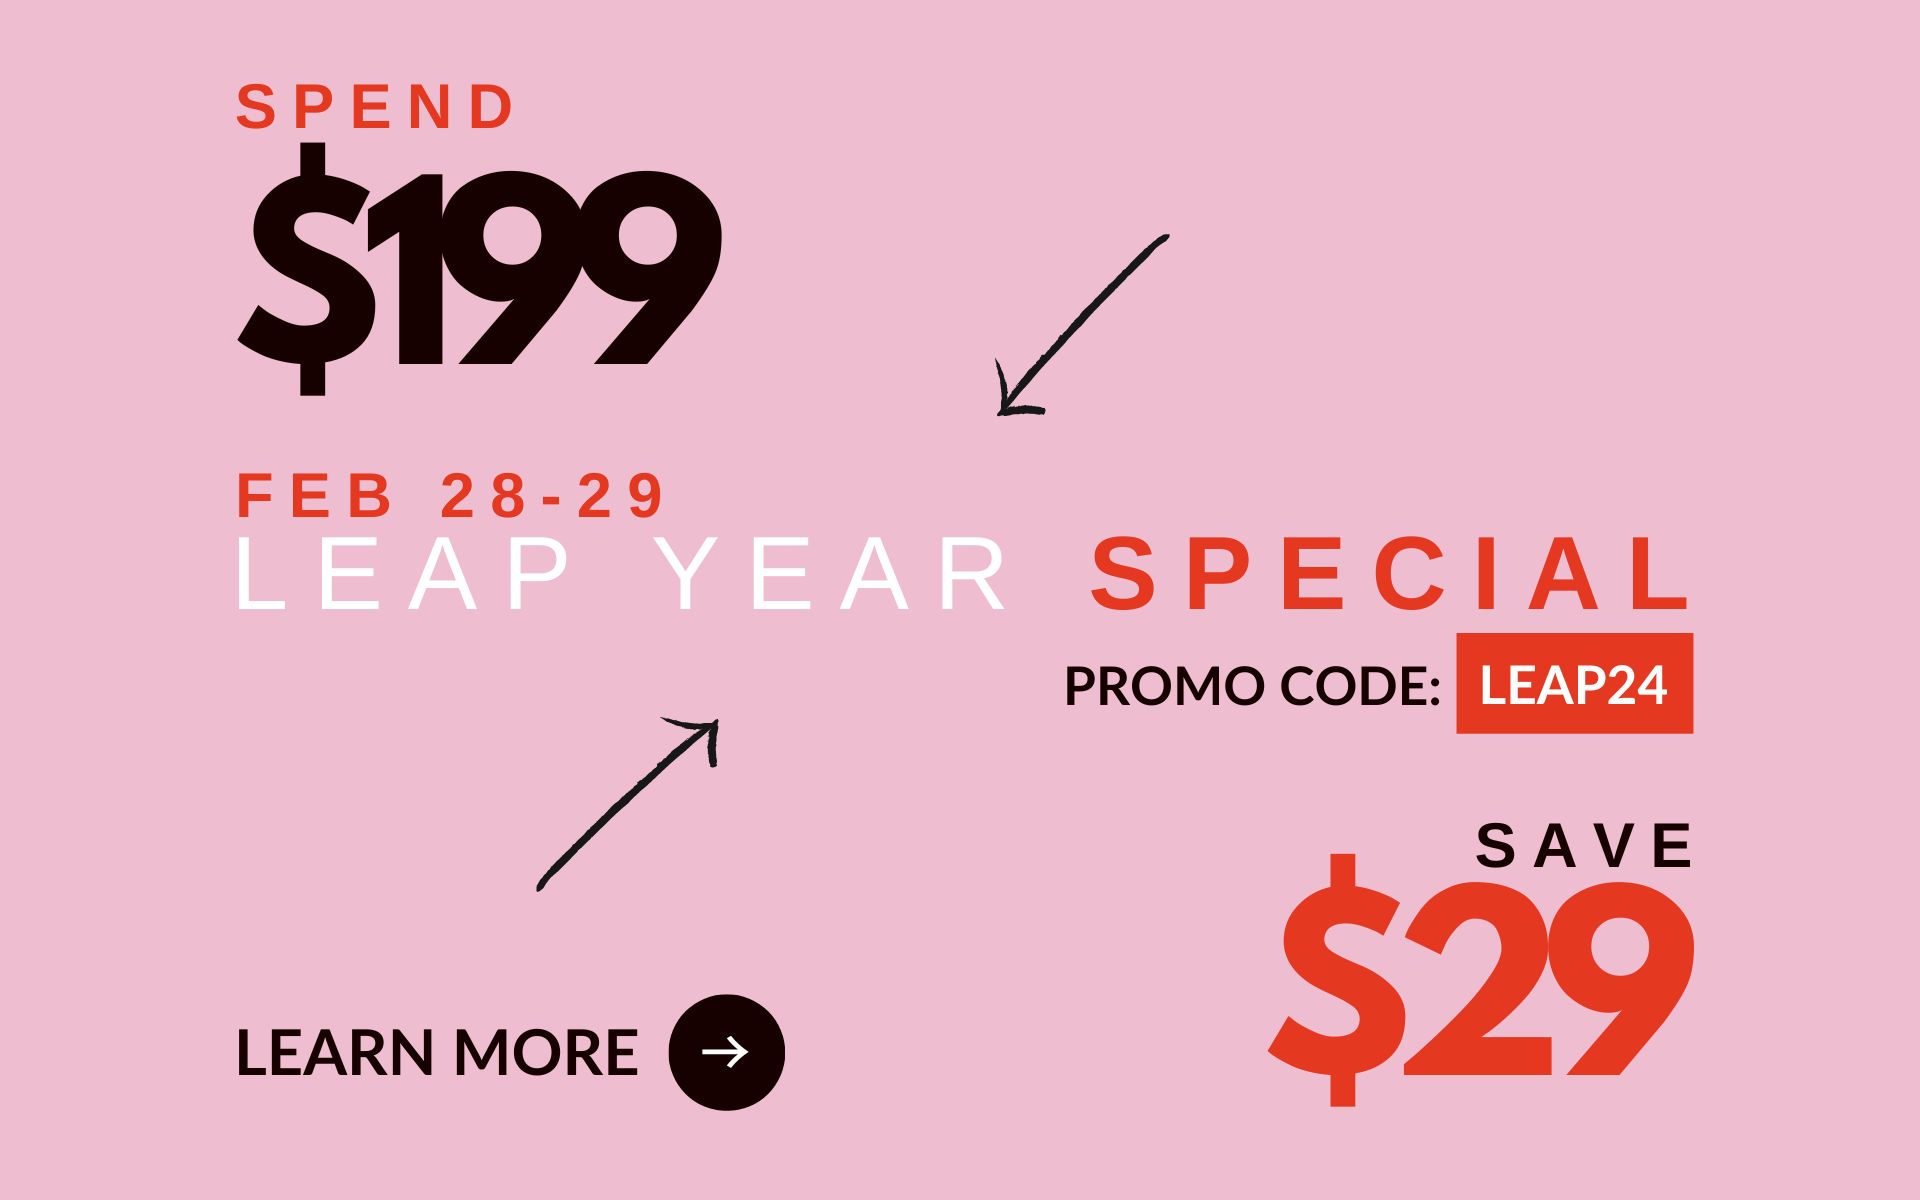 Leap Year Special: Save $29 when you spend $199. Minimum spend $199. Use Promo Code LEAP24.